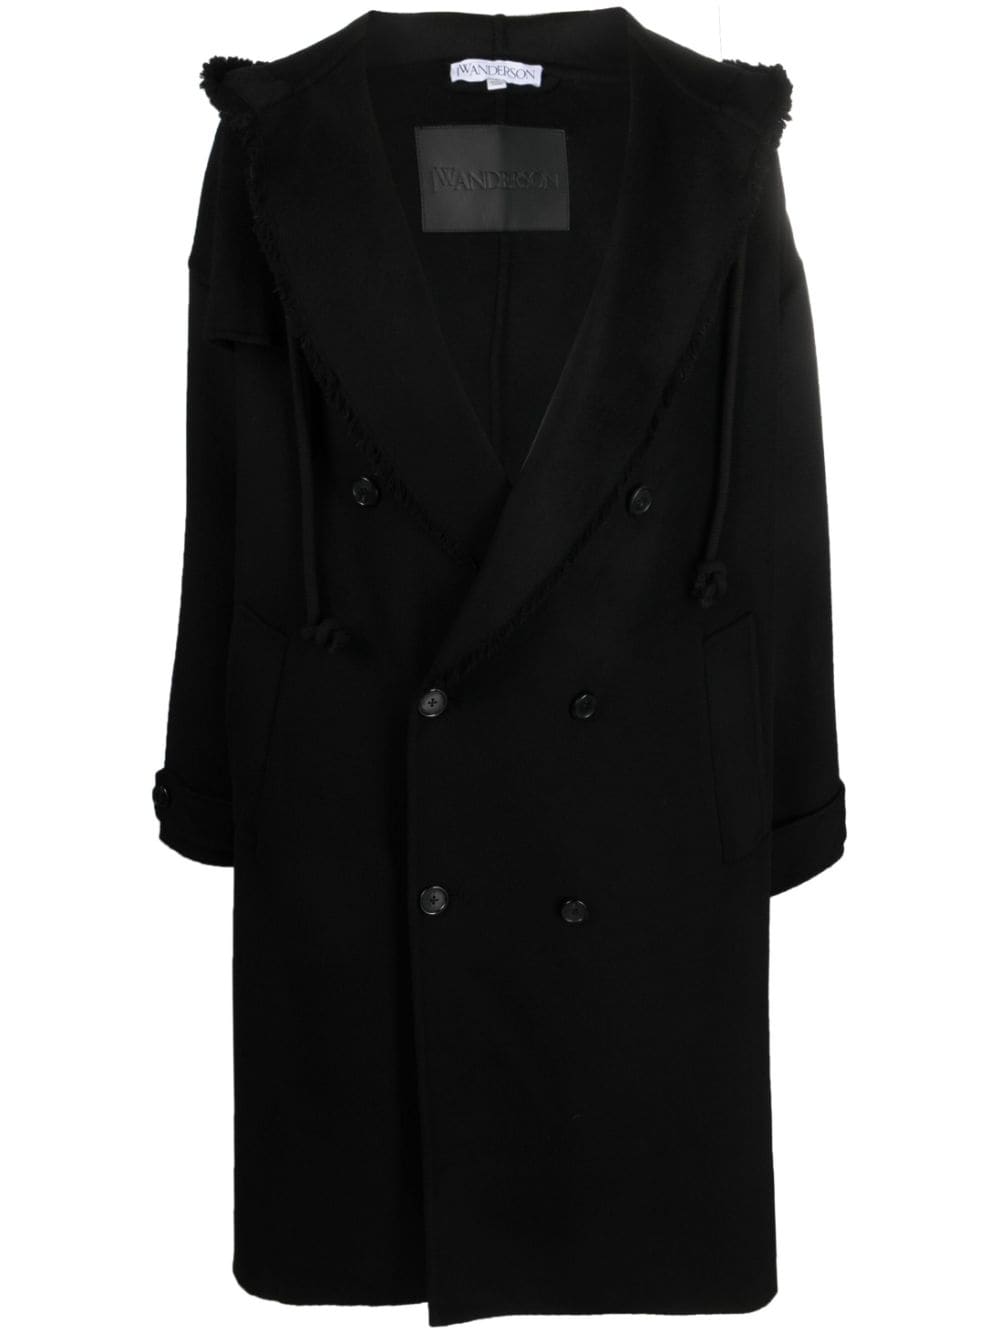 JW ANDERSON BELTED HOODED TRENCH COAT